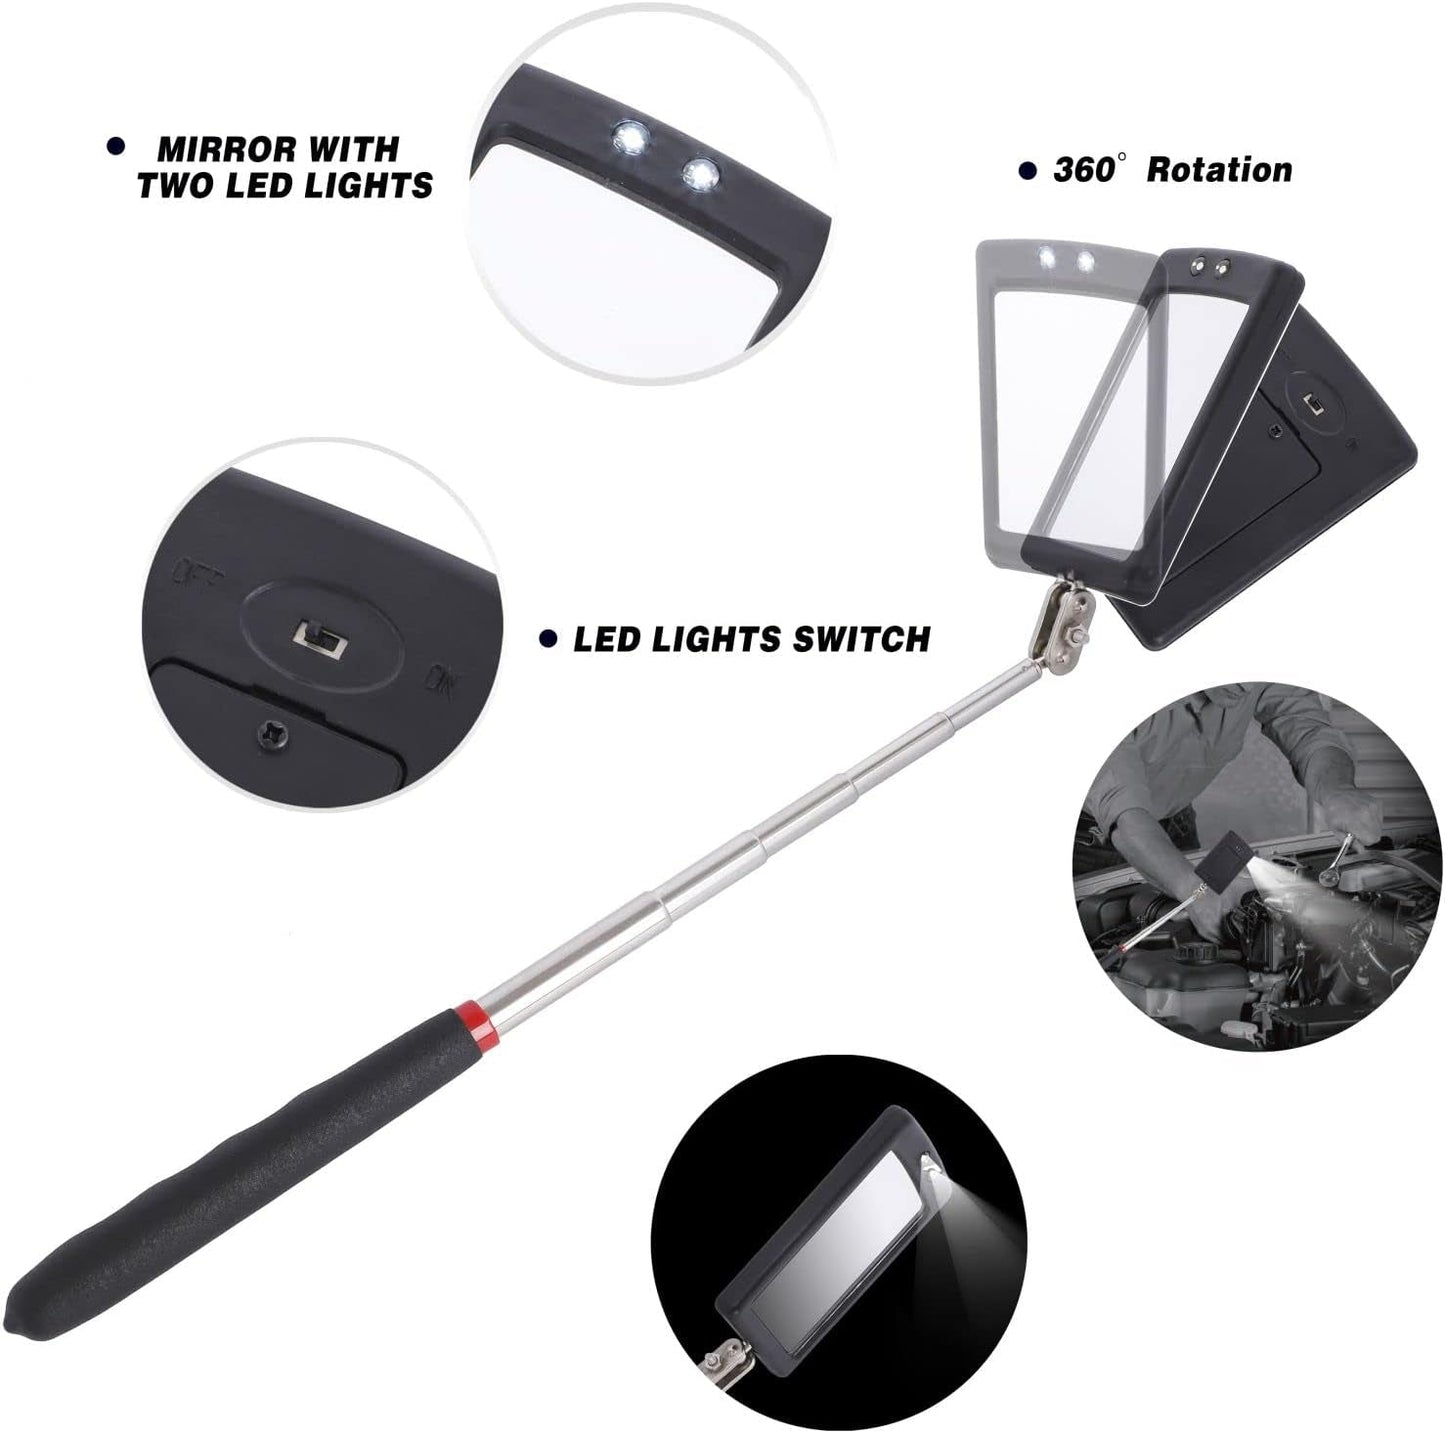 Magnetic Pick up Kit 5Pc, with 1Lb and 10Lb Pick up Rod, Square 360 Swivel Adjustable Inspection Mirror and Flexible Led Flashlight, Magnetic and Telescopic